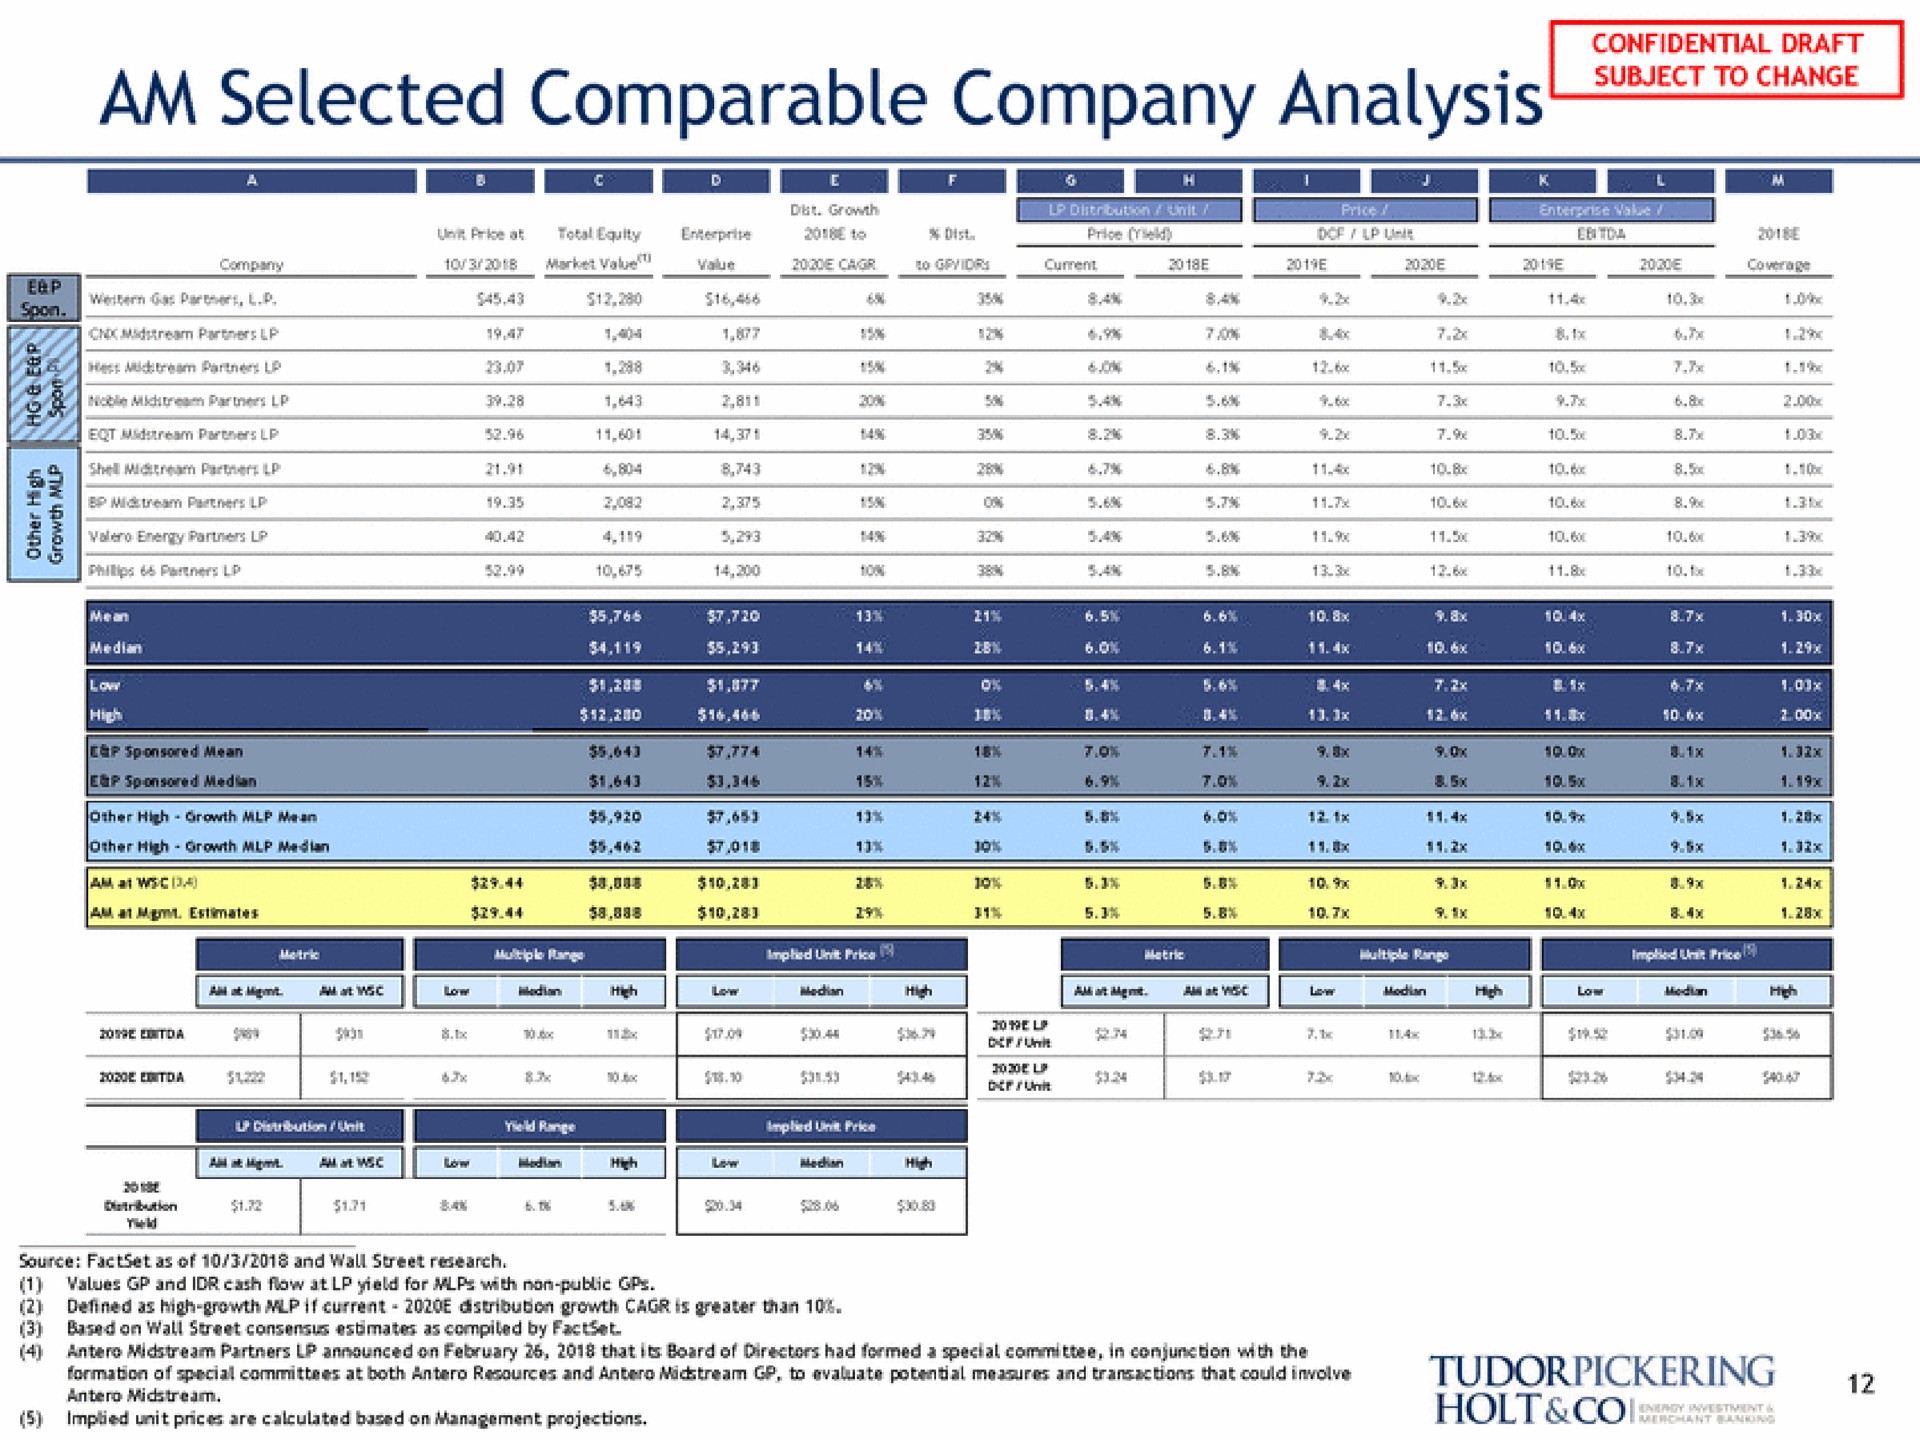 am selected comparable company analysis | Tudor, Pickering, Holt & Co